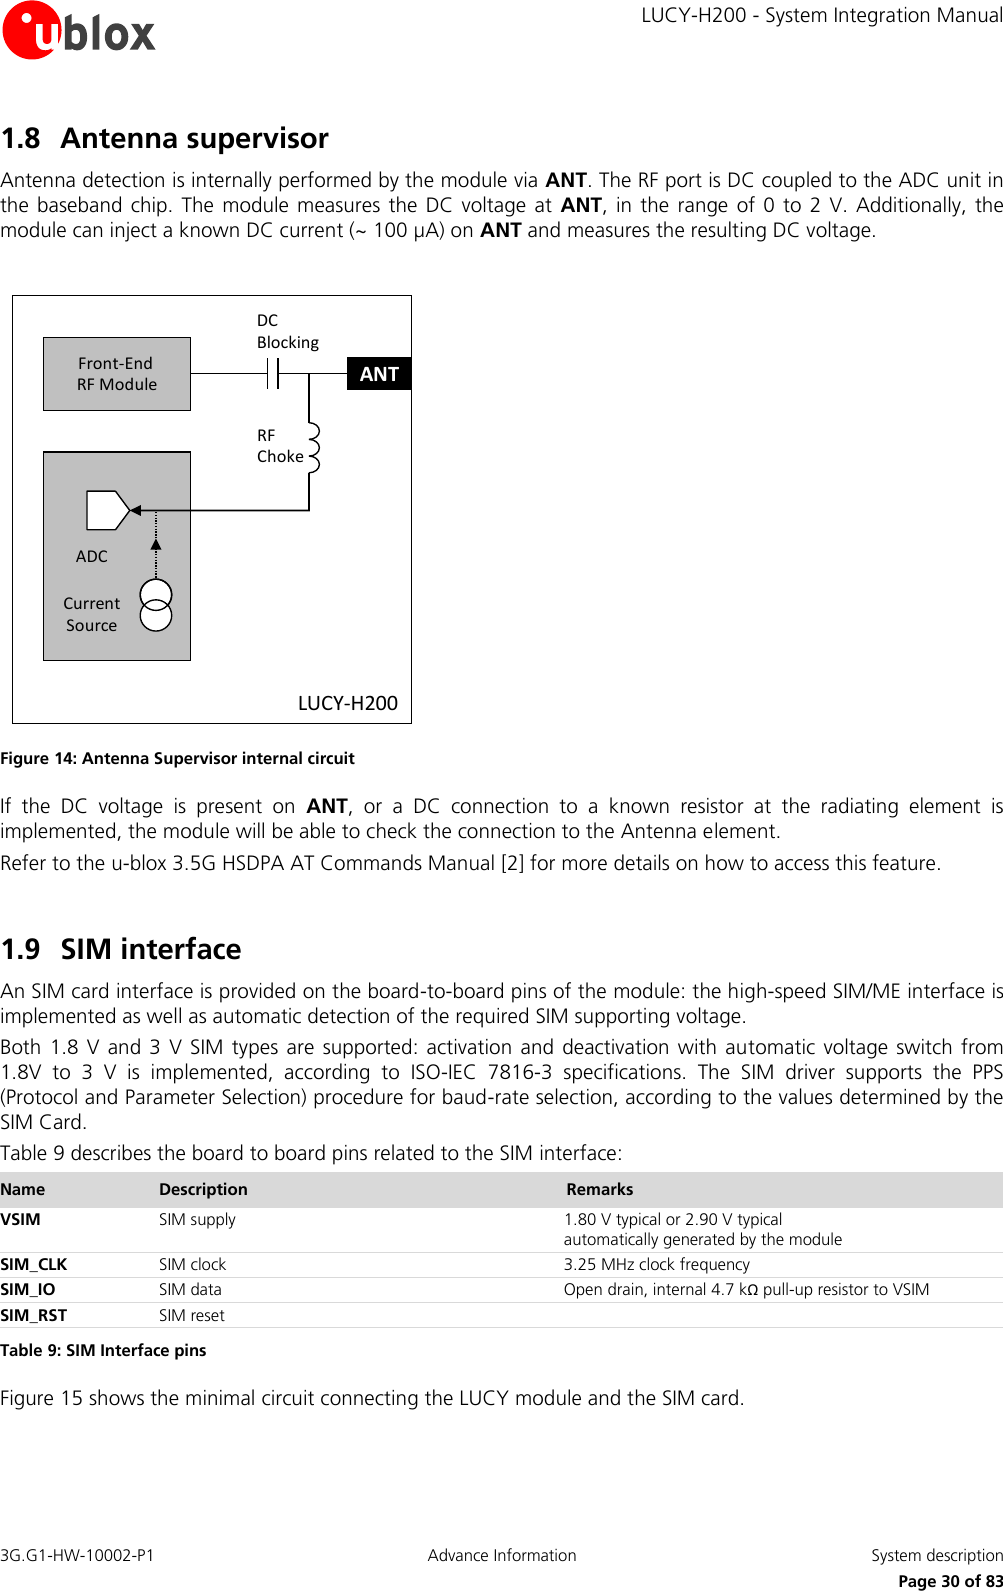     LUCY-H200 - System Integration Manual 3G.G1-HW-10002-P1  Advance Information  System description      Page 30 of 83 1.8 Antenna supervisor  Antenna detection is internally performed by the module via ANT. The RF port is DC coupled to the ADC unit in the baseband  chip.  The module measures  the DC voltage at  ANT,  in  the  range  of  0  to 2  V. Additionally,  the module can inject a known DC current (~ 100 µA) on ANT and measures the resulting DC voltage. LUCY-H200ANTADCCurrent SourceRF ChokeDC BlockingFront-End RF Module Figure 14: Antenna Supervisor internal circuit If  the  DC  voltage  is  present  on  ANT,  or  a  DC  connection  to  a  known  resistor  at  the  radiating  element  is implemented, the module will be able to check the connection to the Antenna element. Refer to the u-blox 3.5G HSDPA AT Commands Manual [2] for more details on how to access this feature.  1.9 SIM interface An SIM card interface is provided on the board-to-board pins of the module: the high-speed SIM/ME interface is implemented as well as automatic detection of the required SIM supporting voltage. Both 1.8 V  and  3  V SIM  types are supported: activation  and deactivation  with  automatic voltage  switch  from 1.8V  to  3  V  is  implemented,  according  to  ISO-IEC  7816-3  specifications.  The  SIM  driver  supports  the  PPS (Protocol and Parameter Selection) procedure for baud-rate selection, according to the values determined by the SIM Card. Table 9 describes the board to board pins related to the SIM interface: Name Description Remarks VSIM SIM supply 1.80 V typical or 2.90 V typical  automatically generated by the module SIM_CLK SIM clock 3.25 MHz clock frequency SIM_IO SIM data Open drain, internal 4.7 kΩ pull-up resistor to VSIM SIM_RST SIM reset  Table 9: SIM Interface pins Figure 15 shows the minimal circuit connecting the LUCY module and the SIM card. 